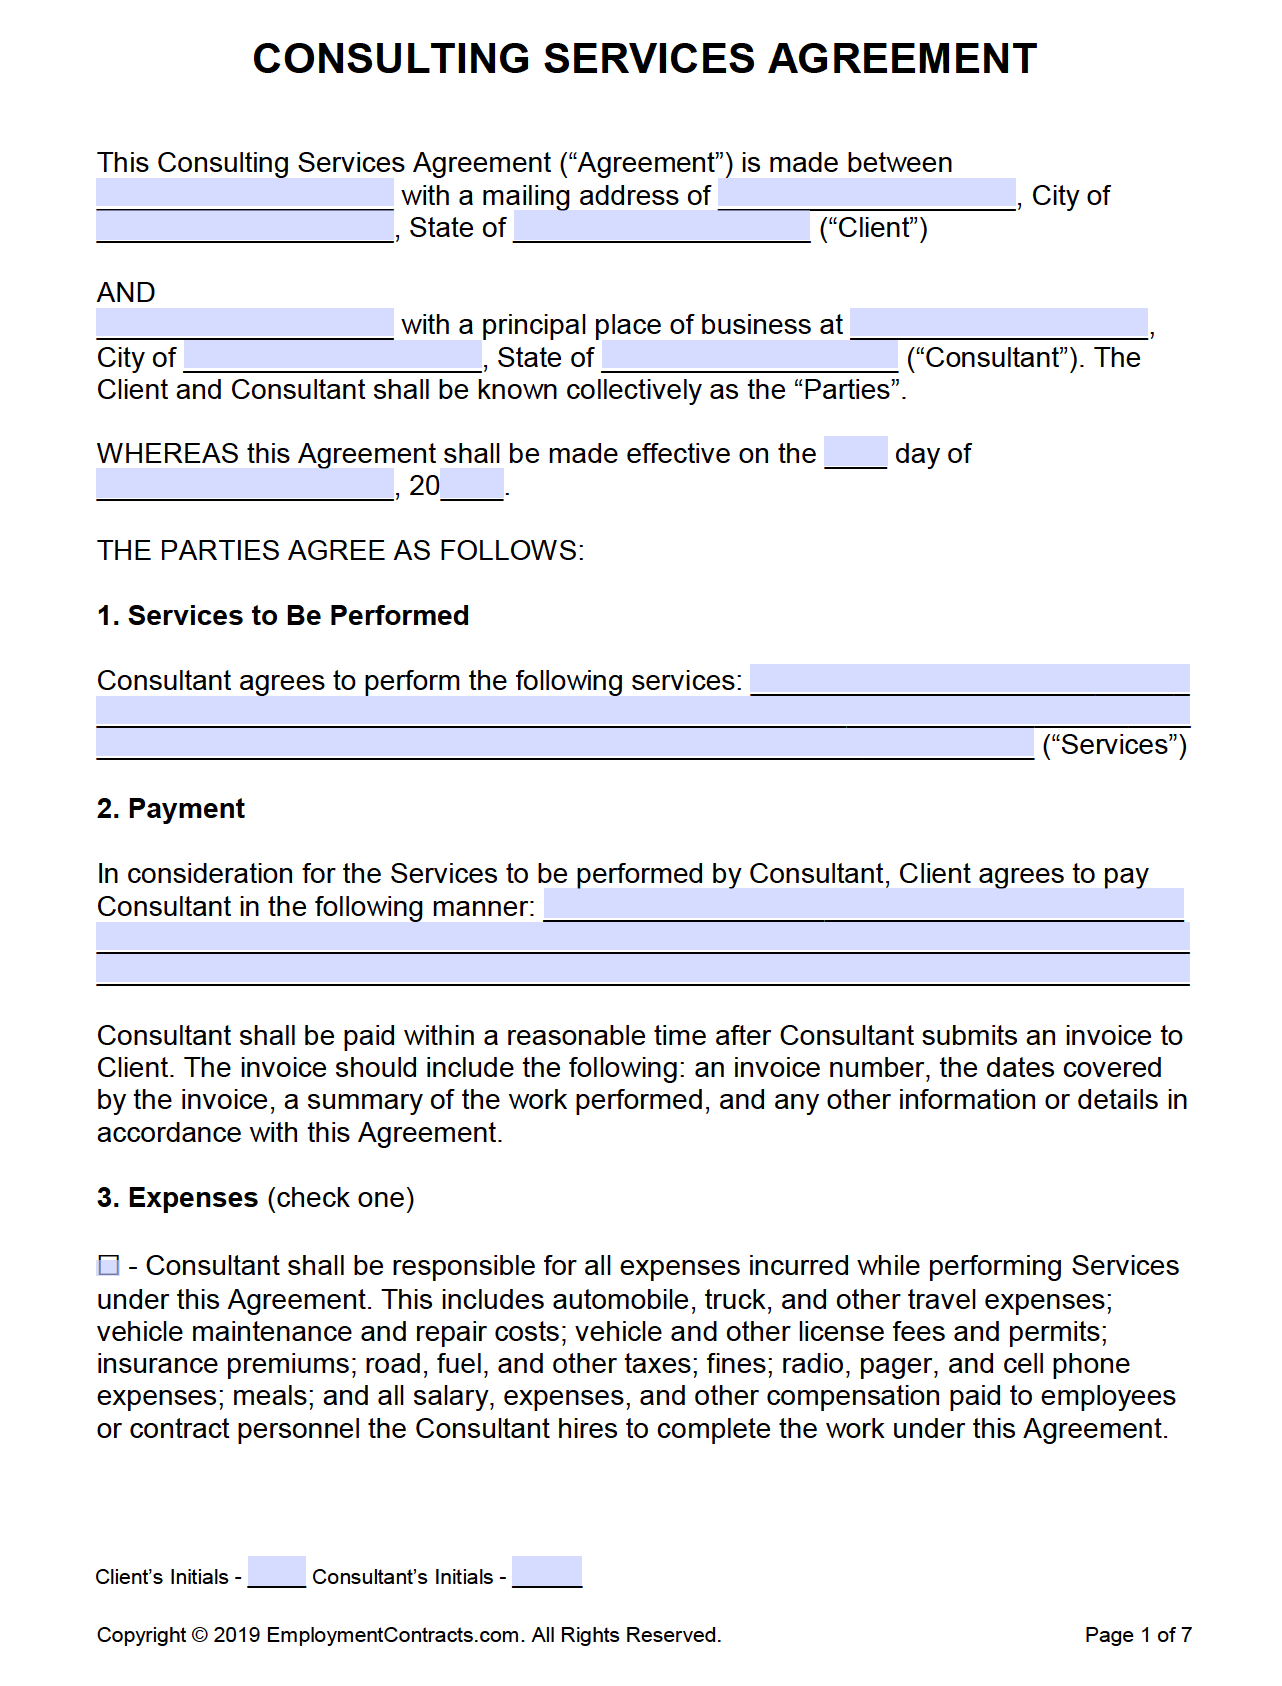 Free Consulting (Service) Agreement Template  PDF  Word For directors service agreement template